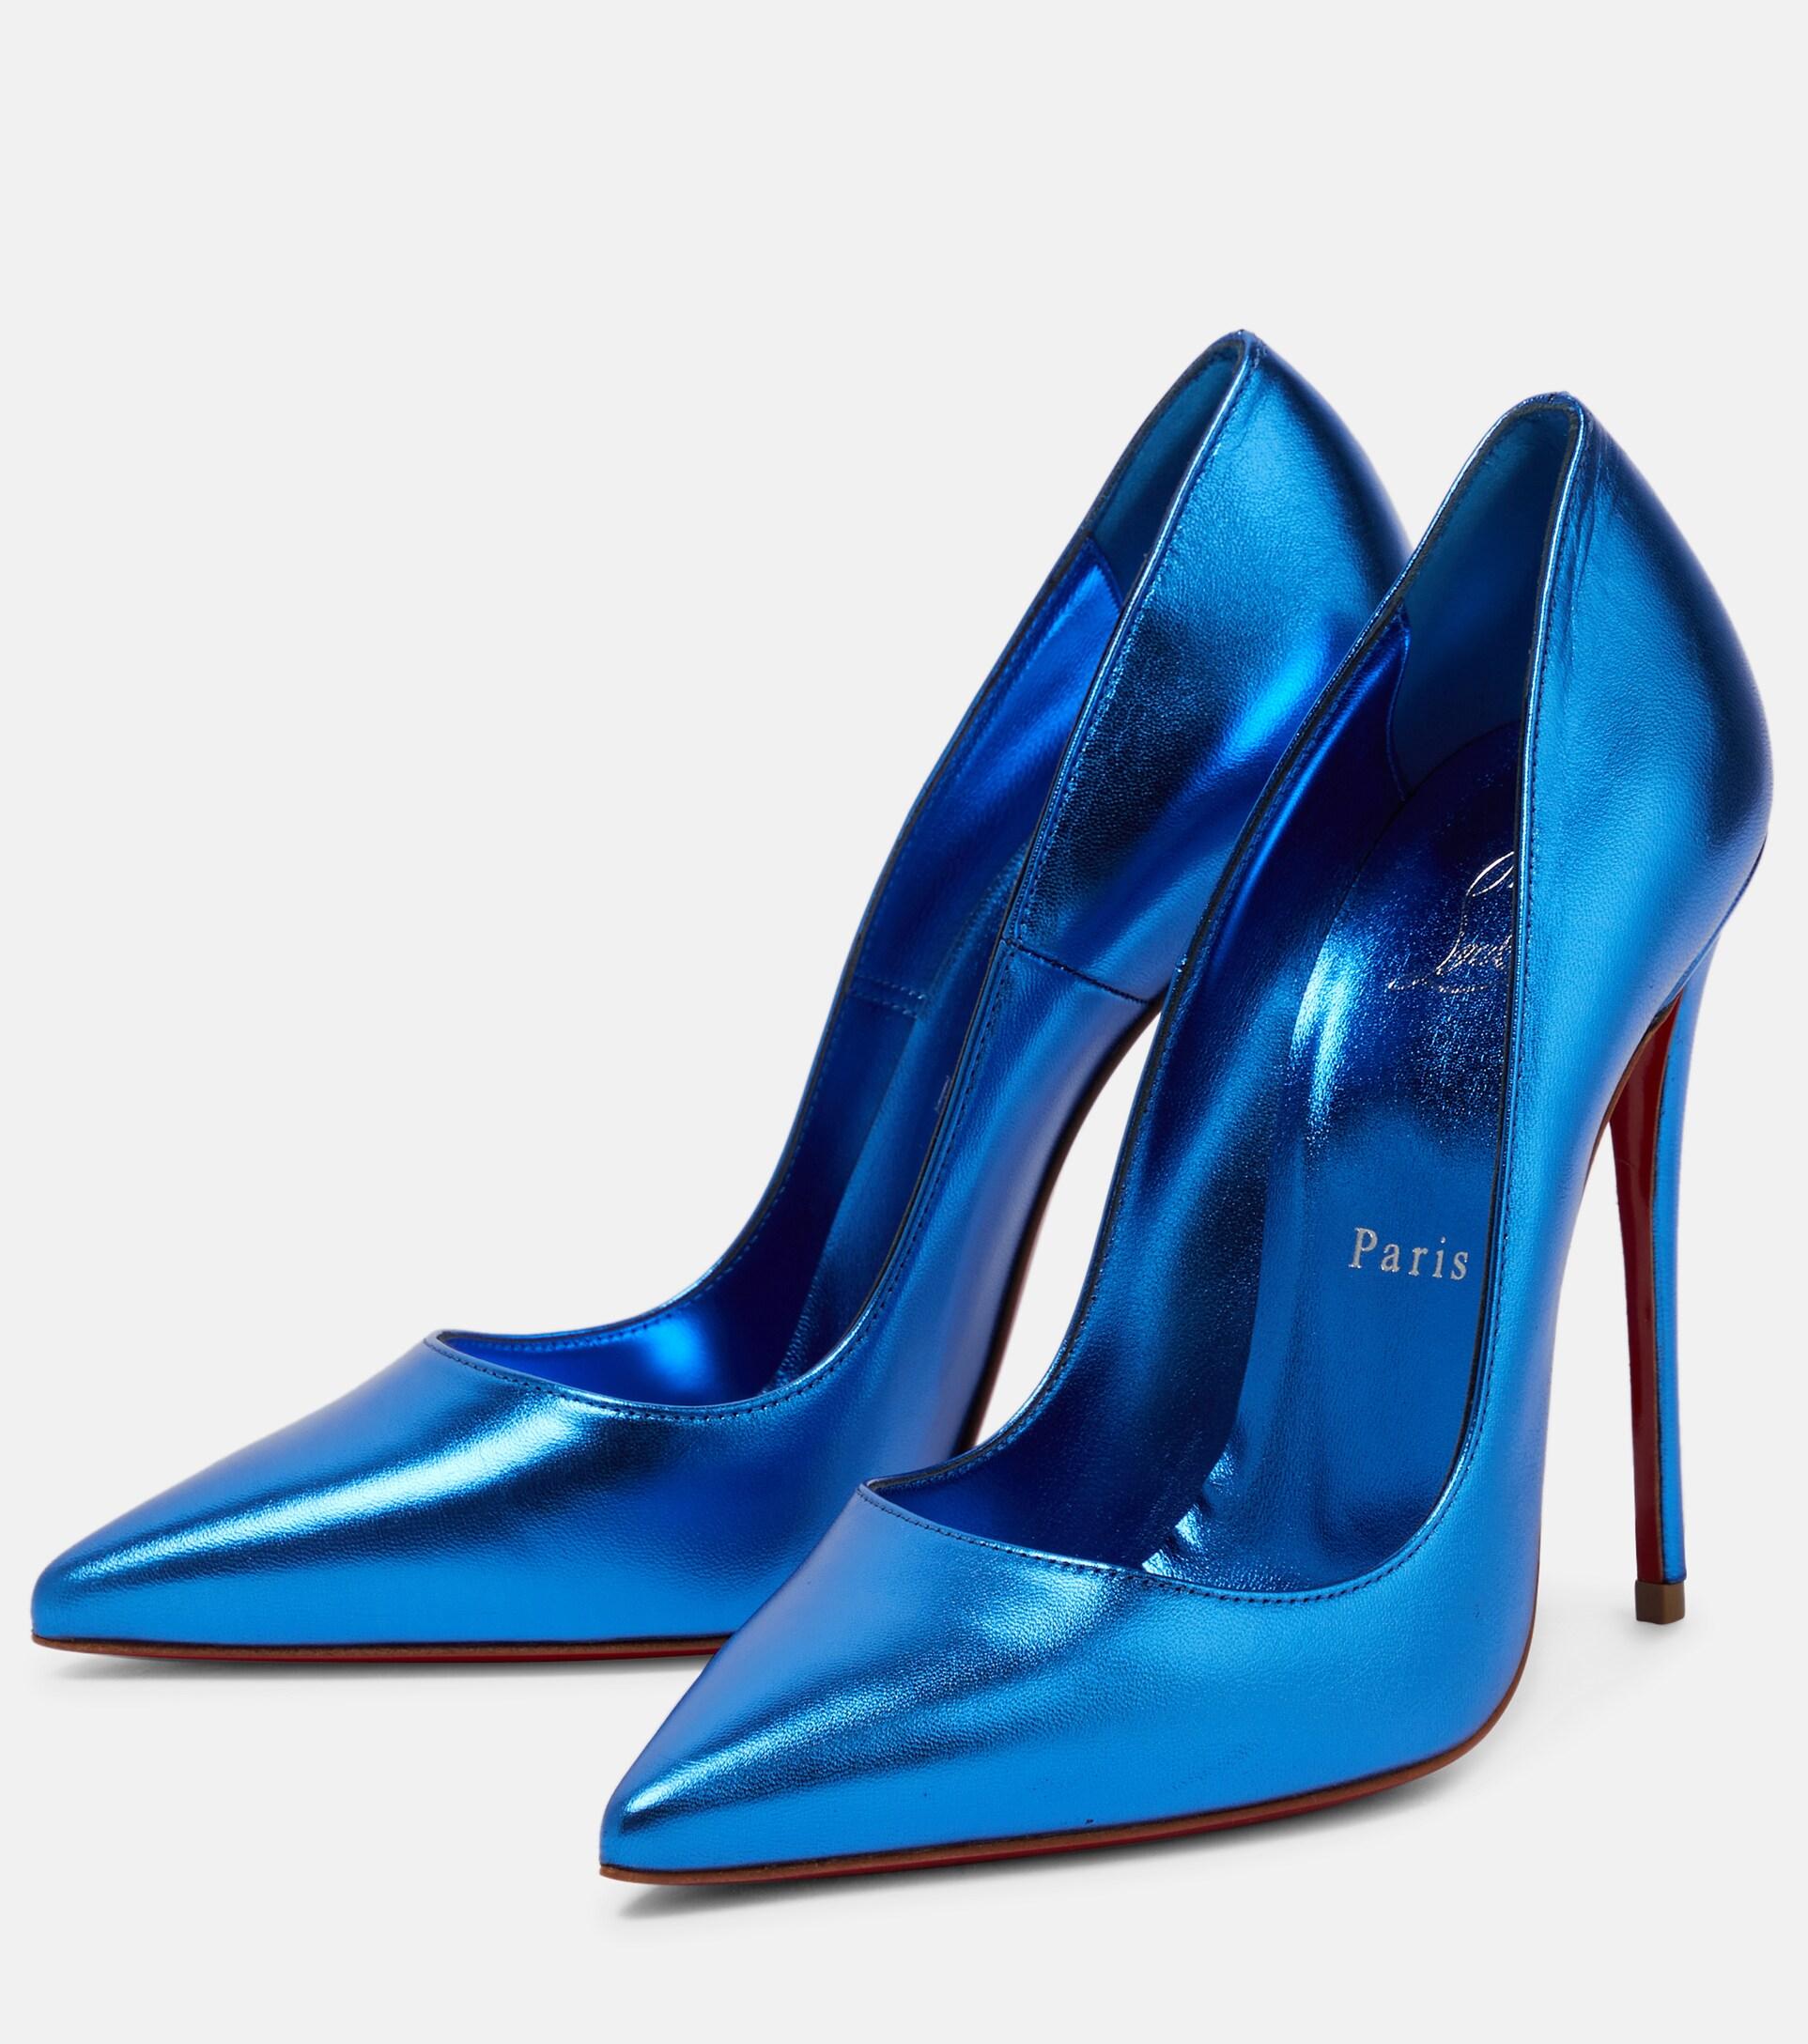 120mm Christian Louboutin Dark Blue V-neck Pumps paired with Louis